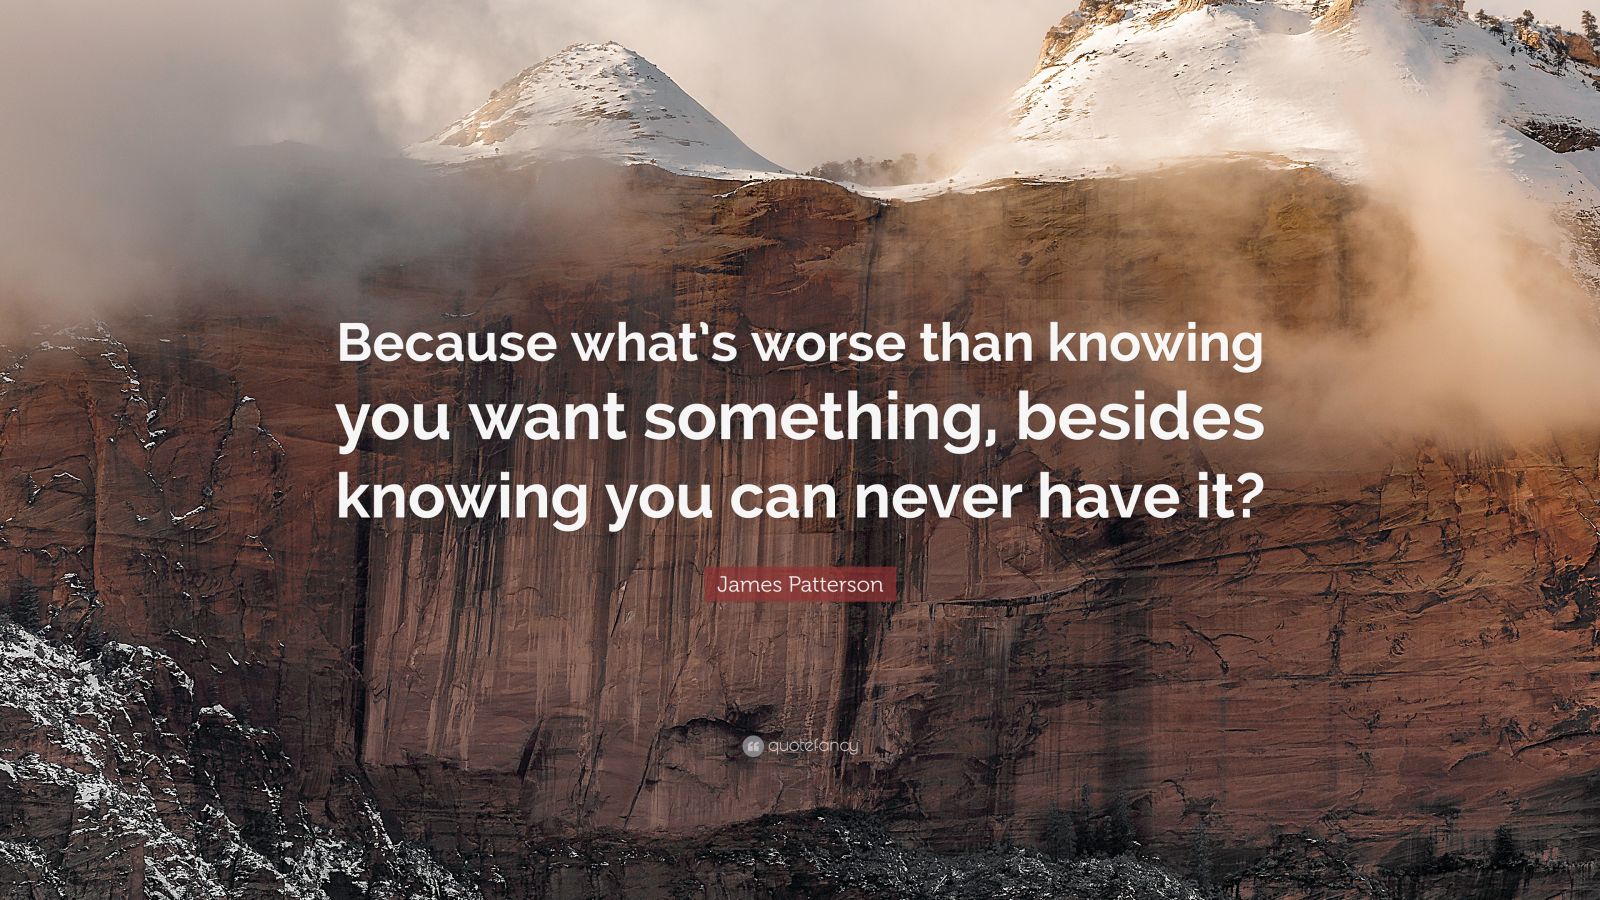 James Patterson Quote: “Because what’s worse than knowing you want ...